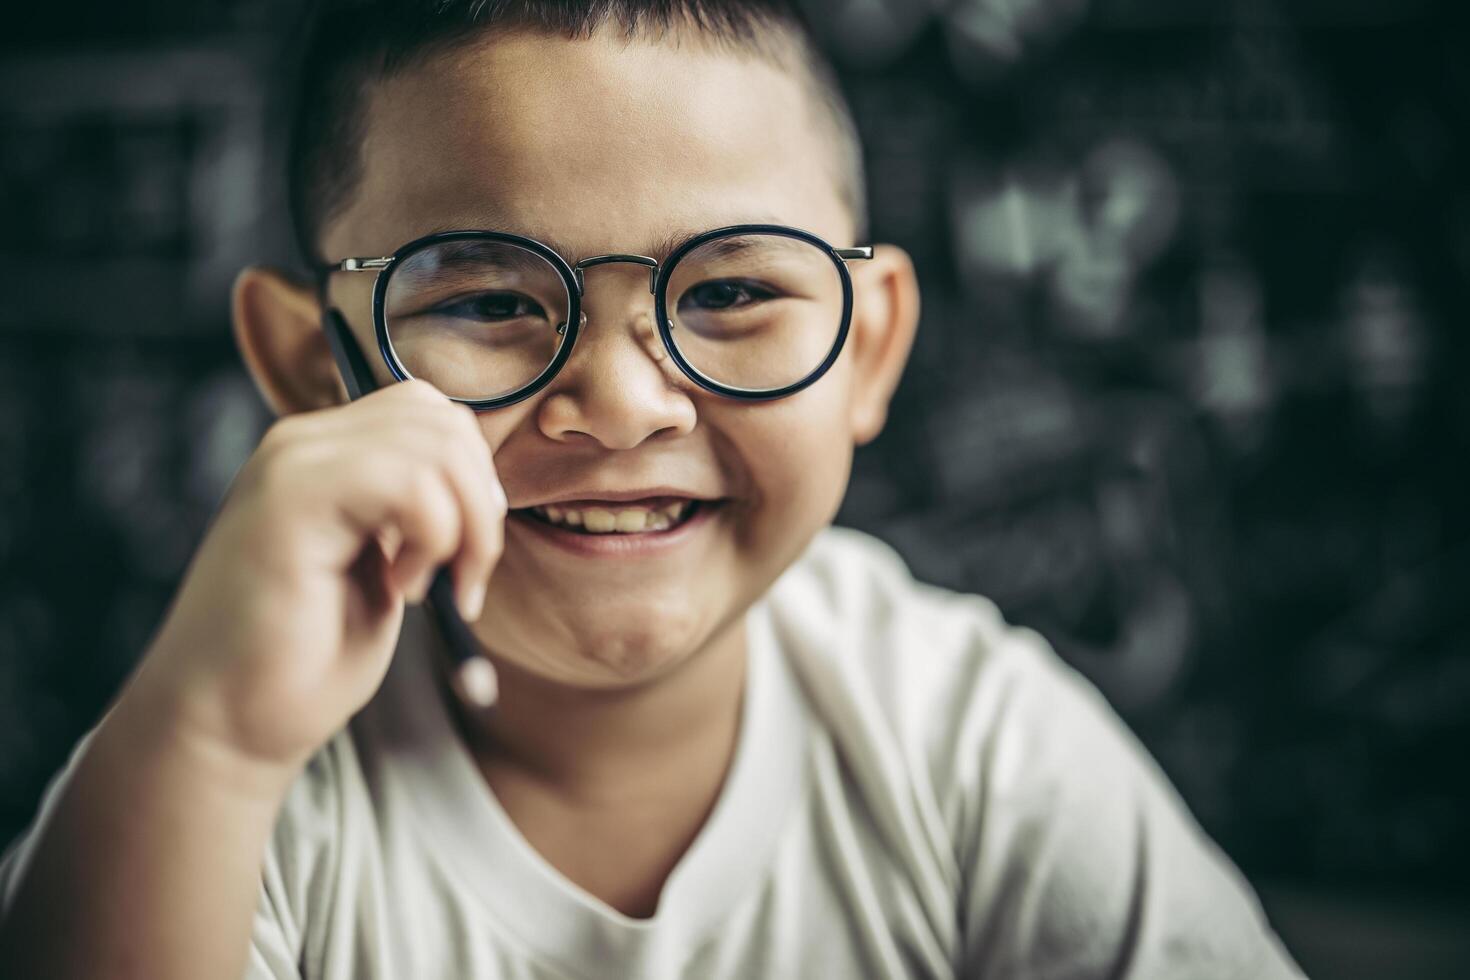 A boy with glasses sitting in the classroom studying photo